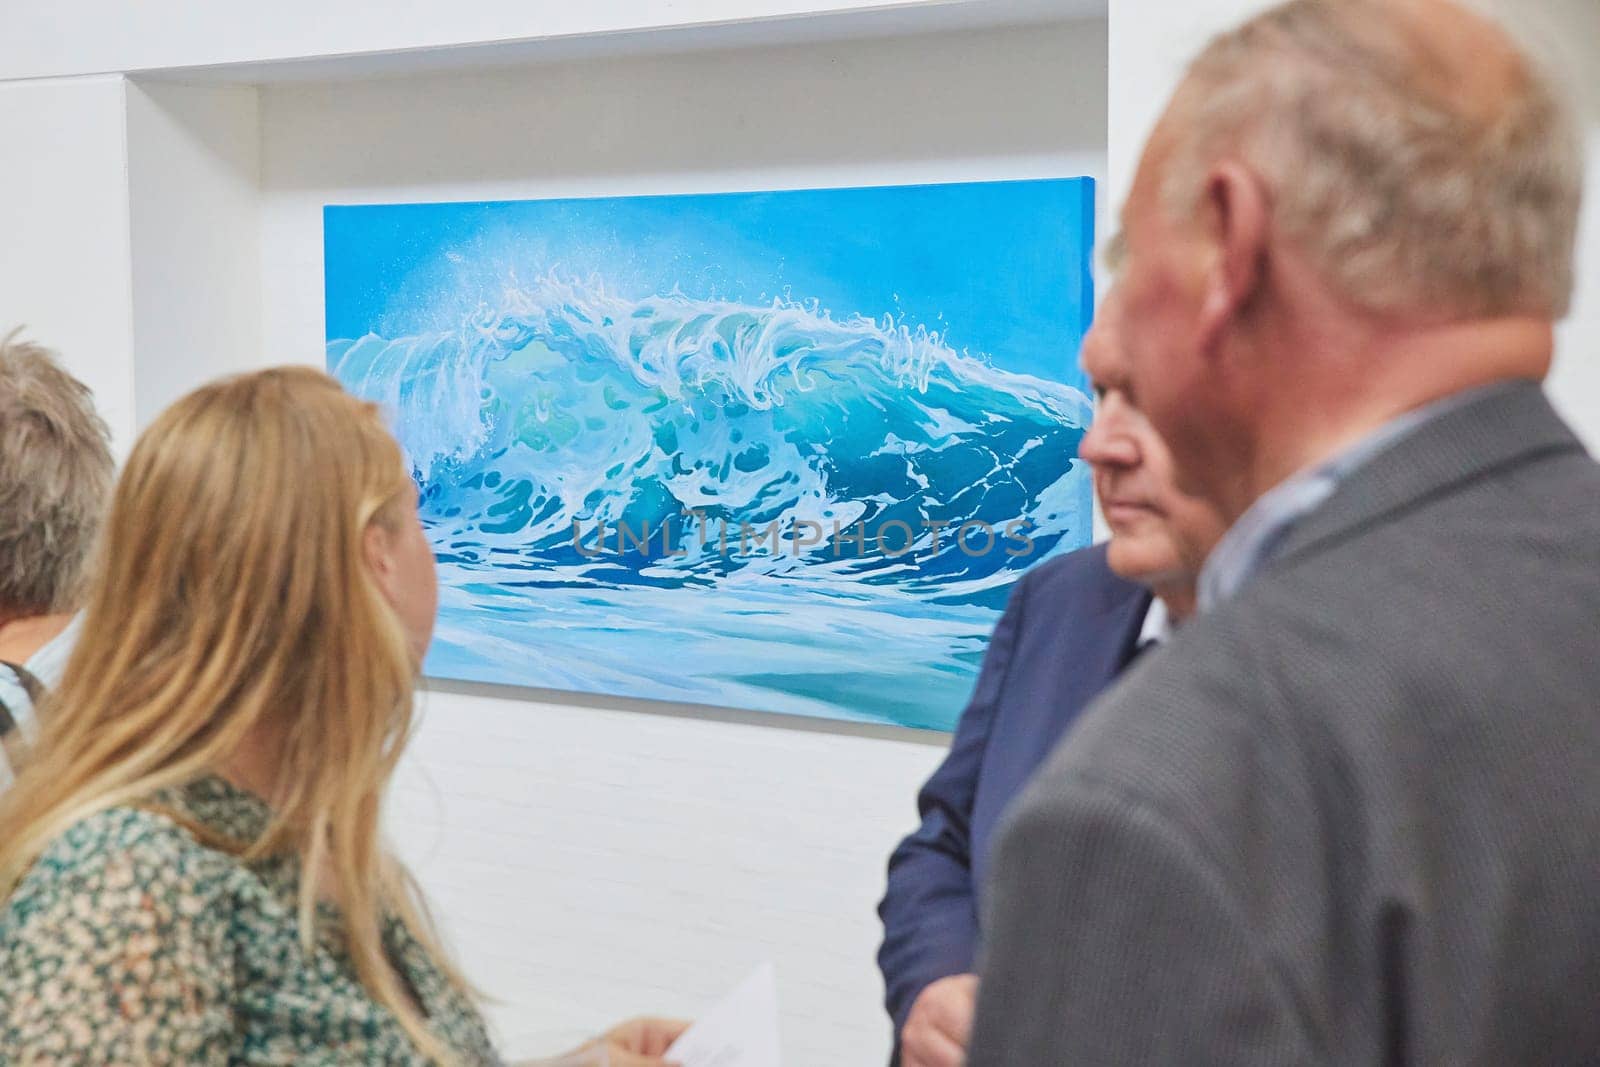 Skagen, Denmark, May, 2023: Visitors look at the paintings in the gallery